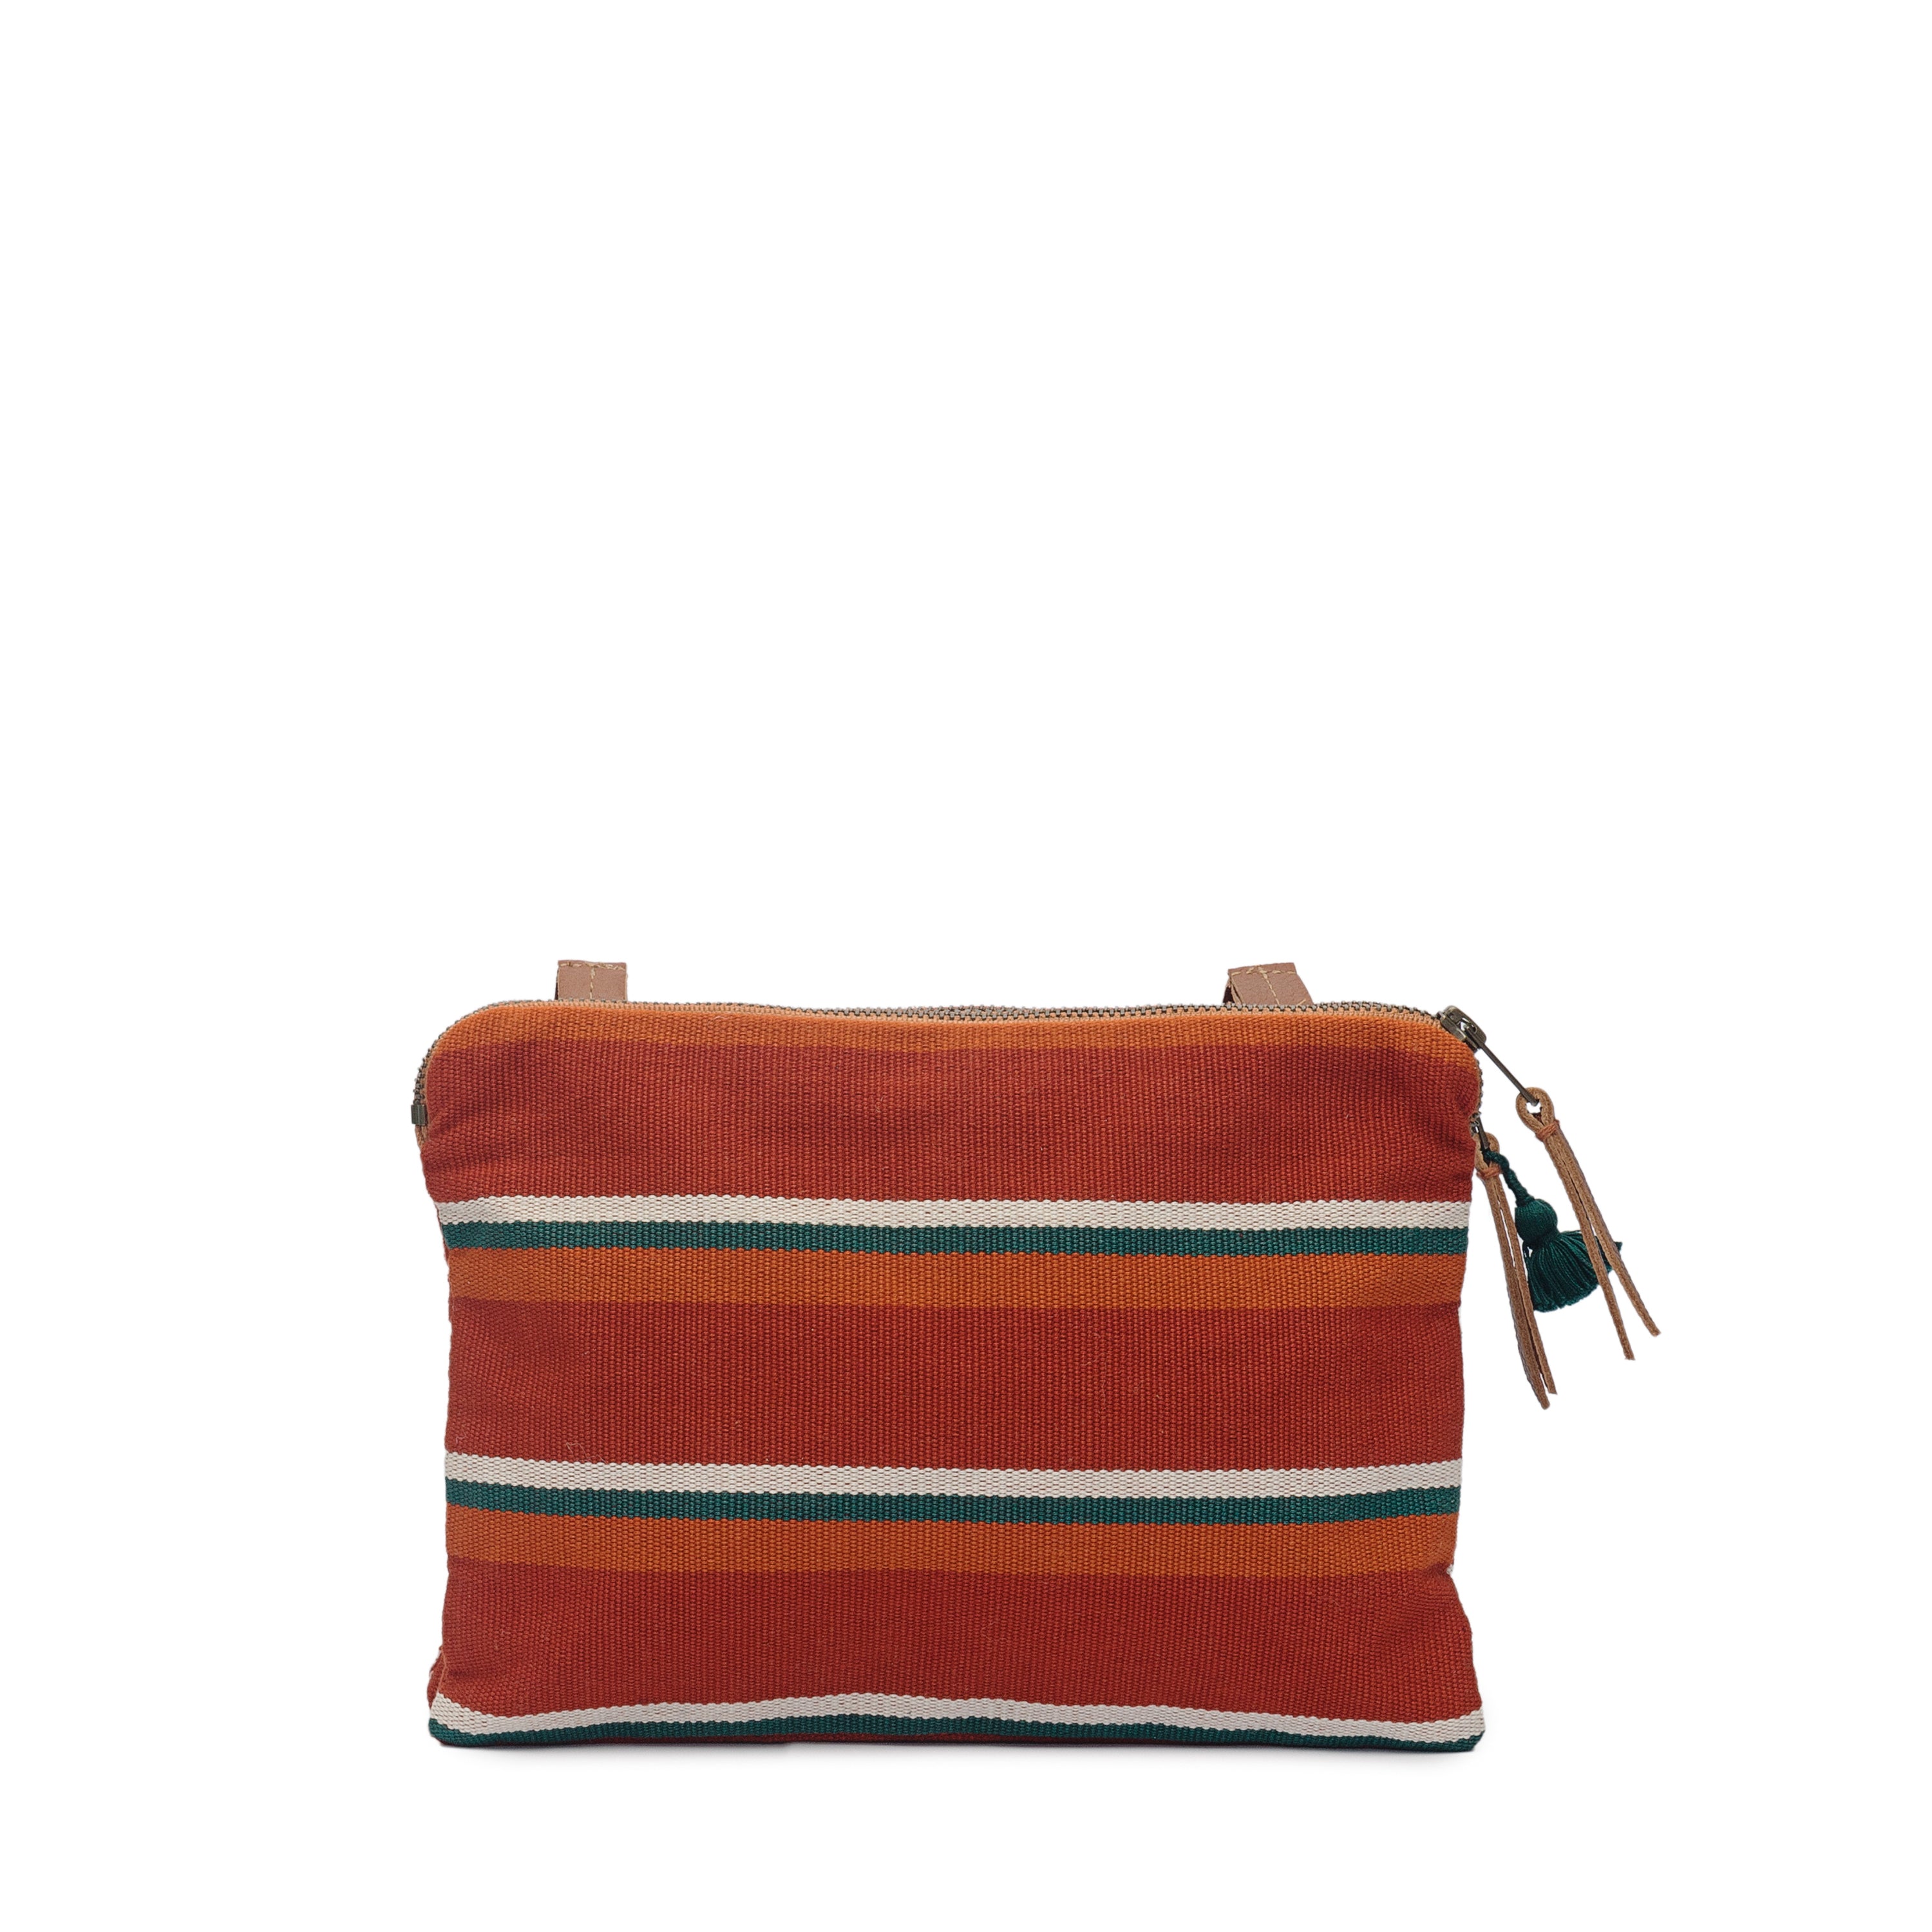 Back of the hand woven artisan Miriam Crossbody bag in Ginger. The back pattern has orange, white, and green horizontal stripes.